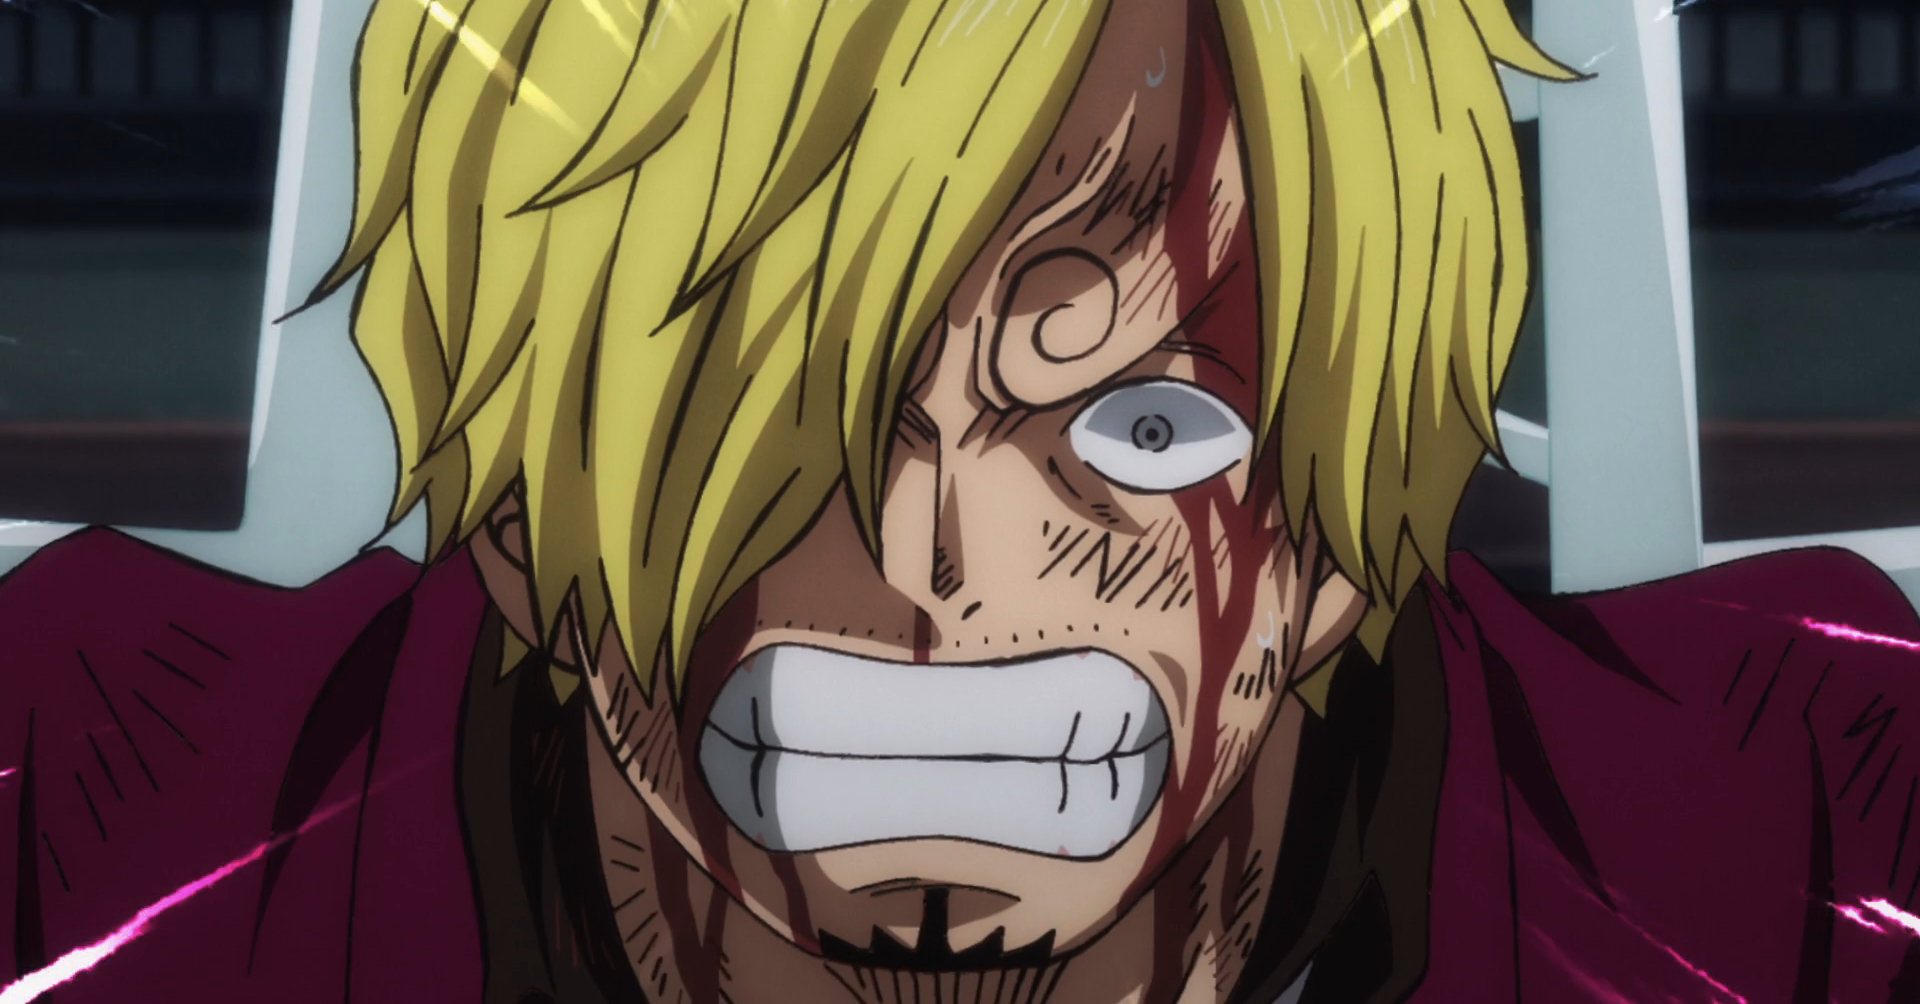 One Piece Episode 1020 Preview Released - Anime Corner